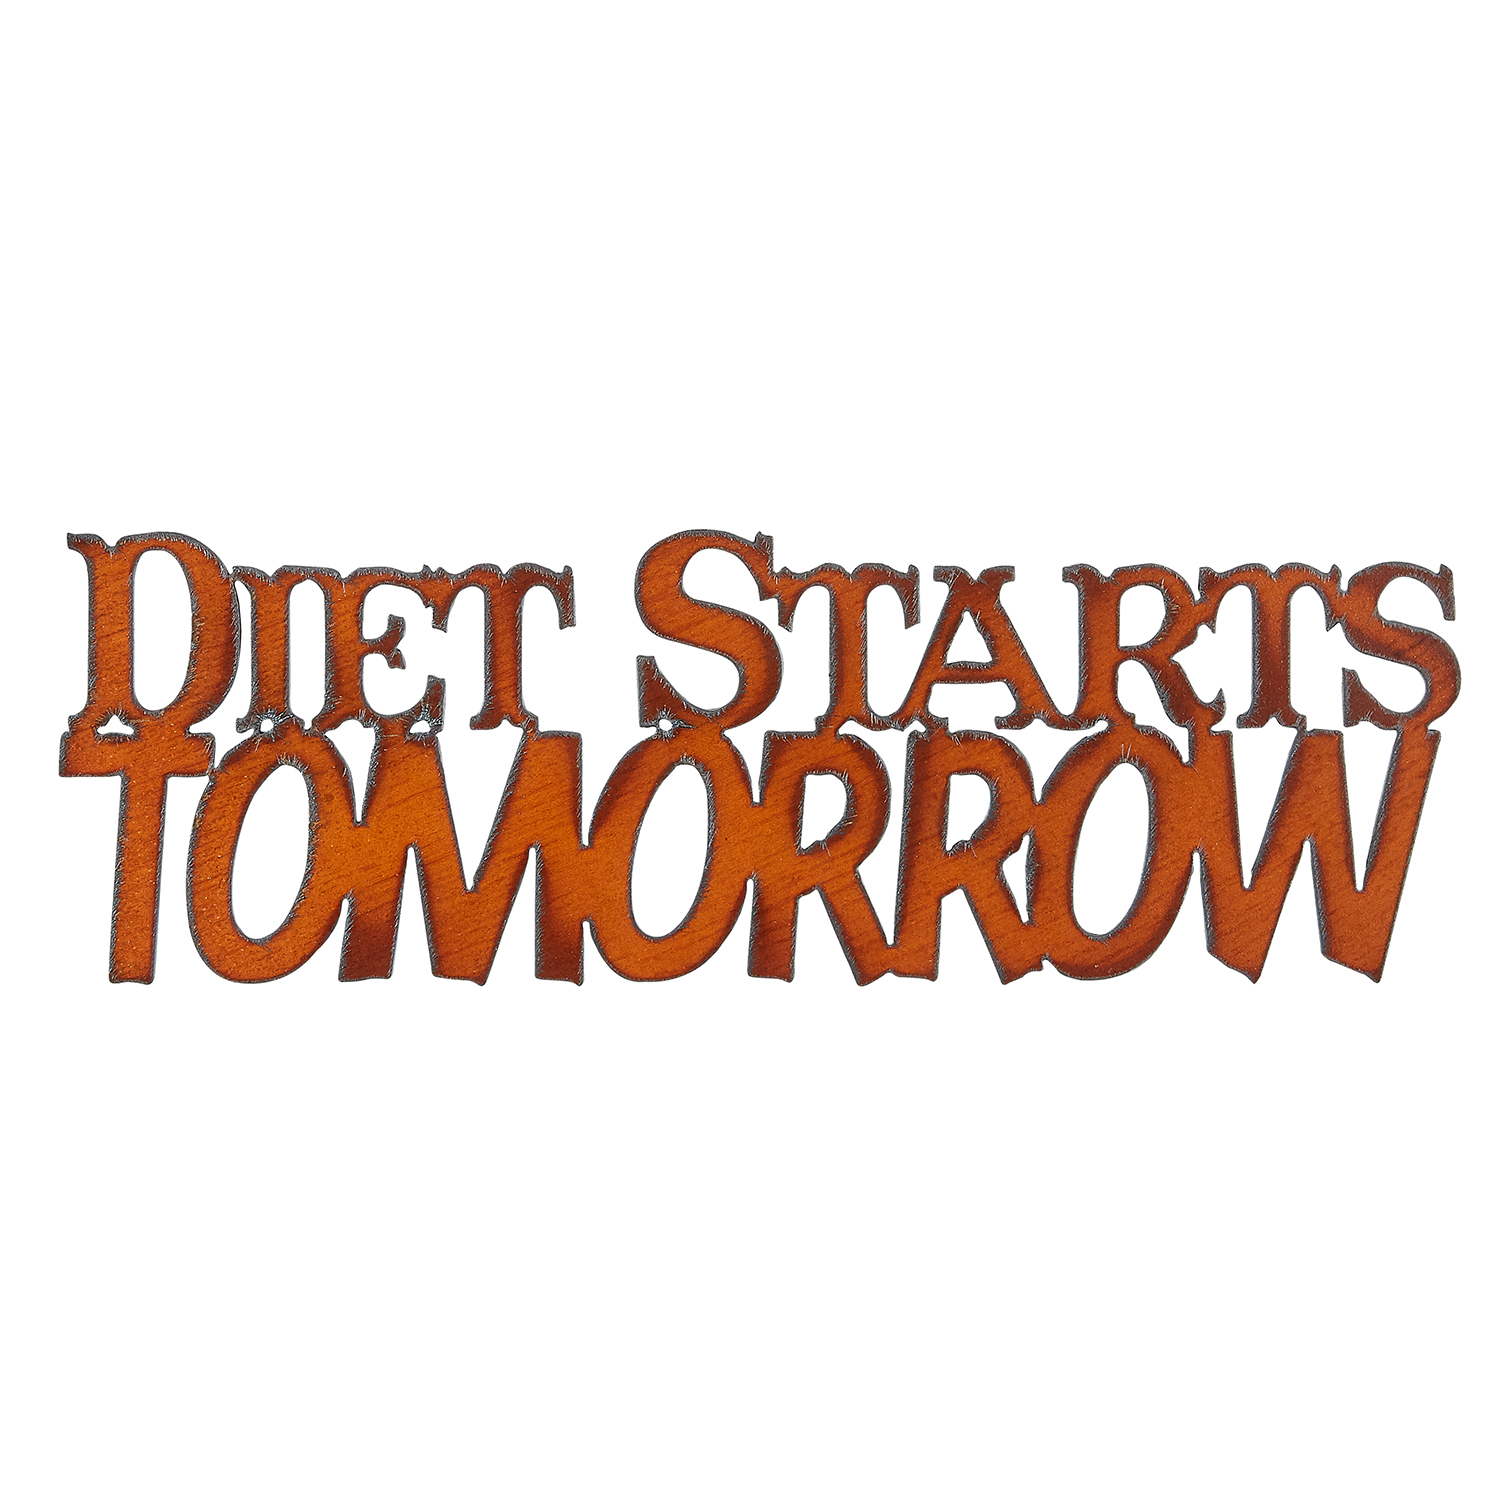 Diet Starts Tomorrow Cut-out Sign